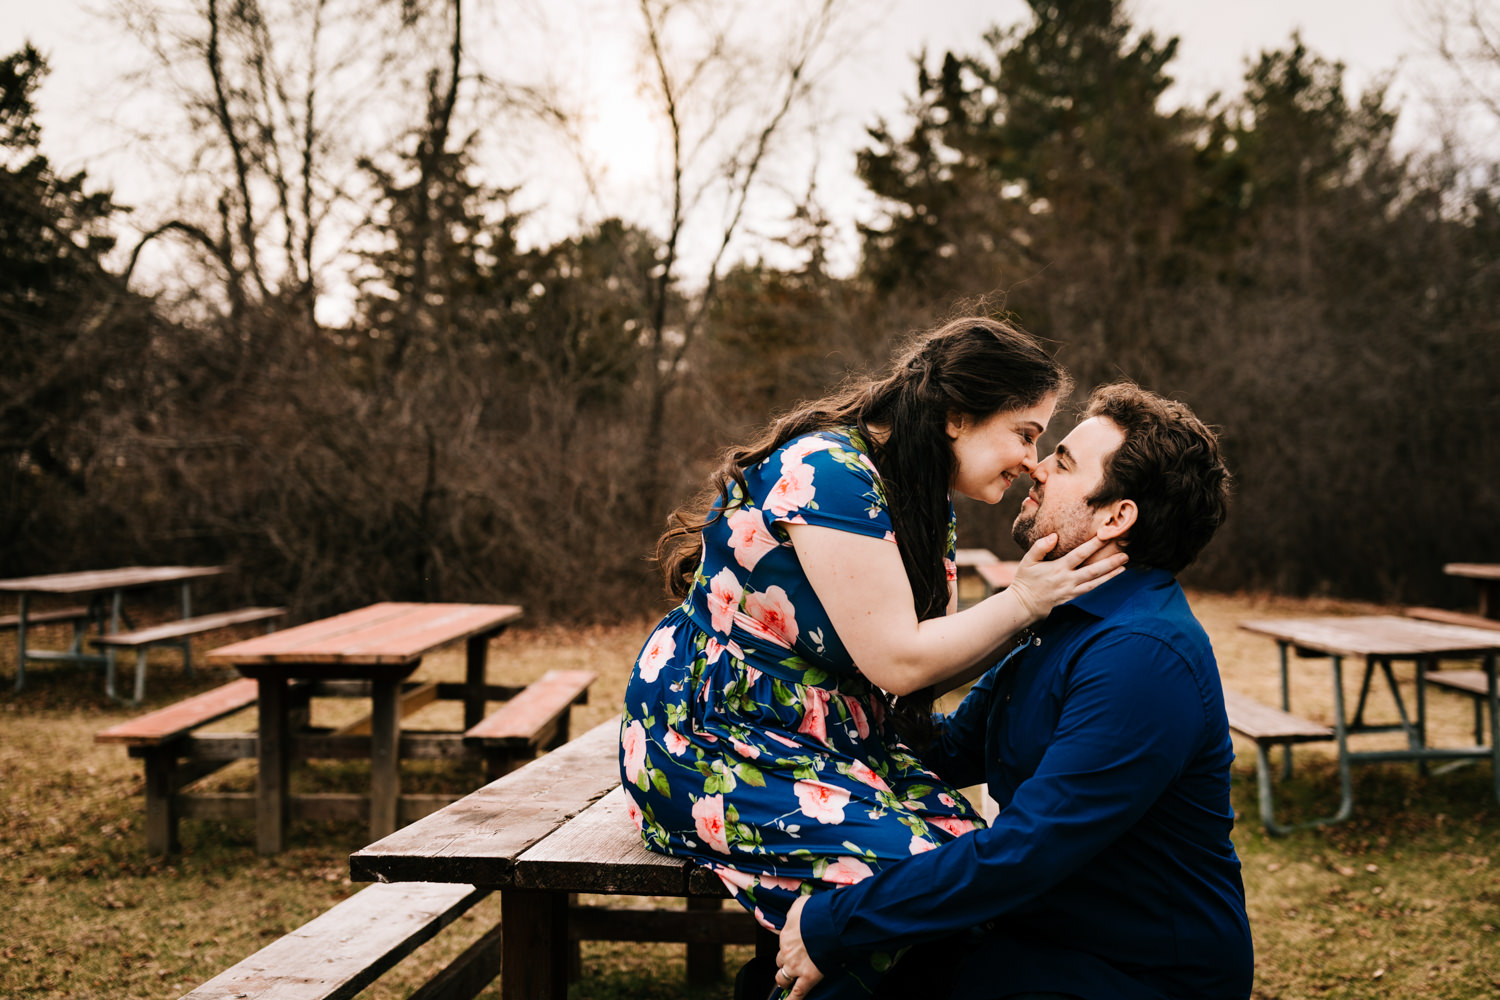 Woman sitting on picnic table kissing man wearing blue floral dress in Massachusetts